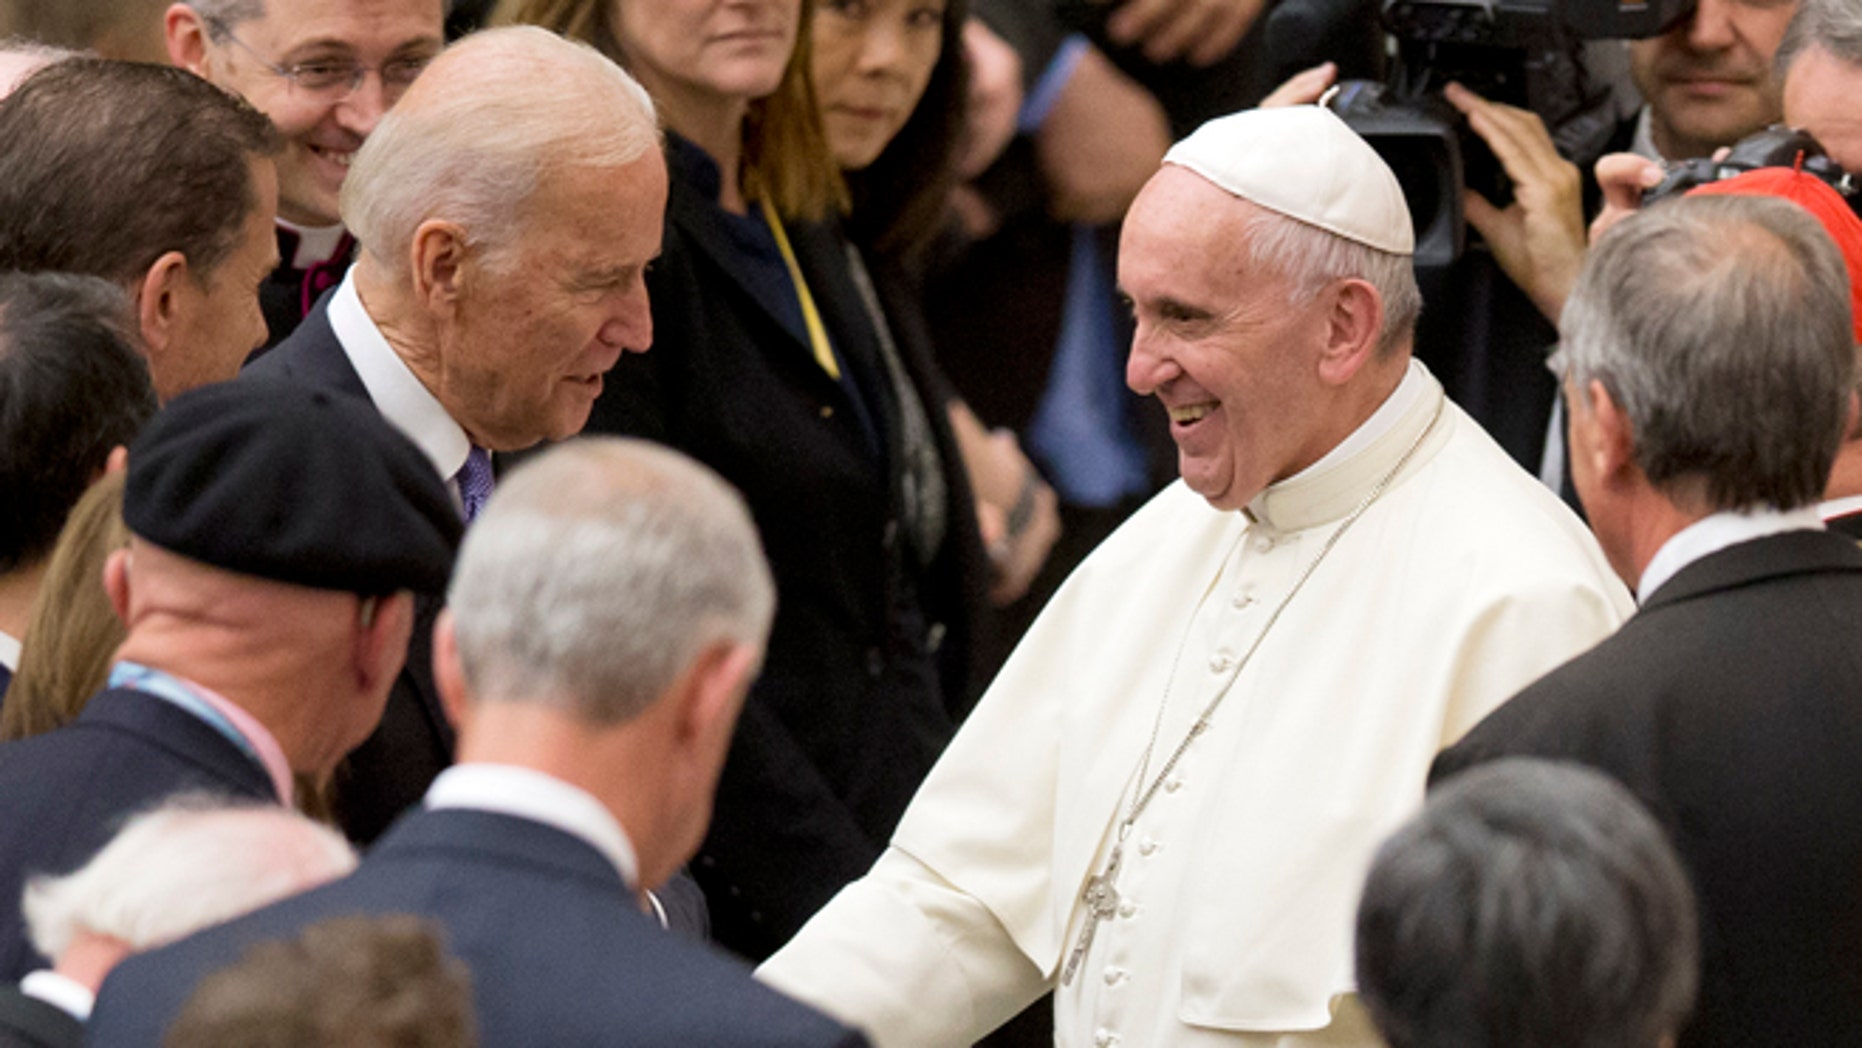 During Vatican Visit Joe Biden Urges World Leaders To Find A Cure For Cancer Fox News